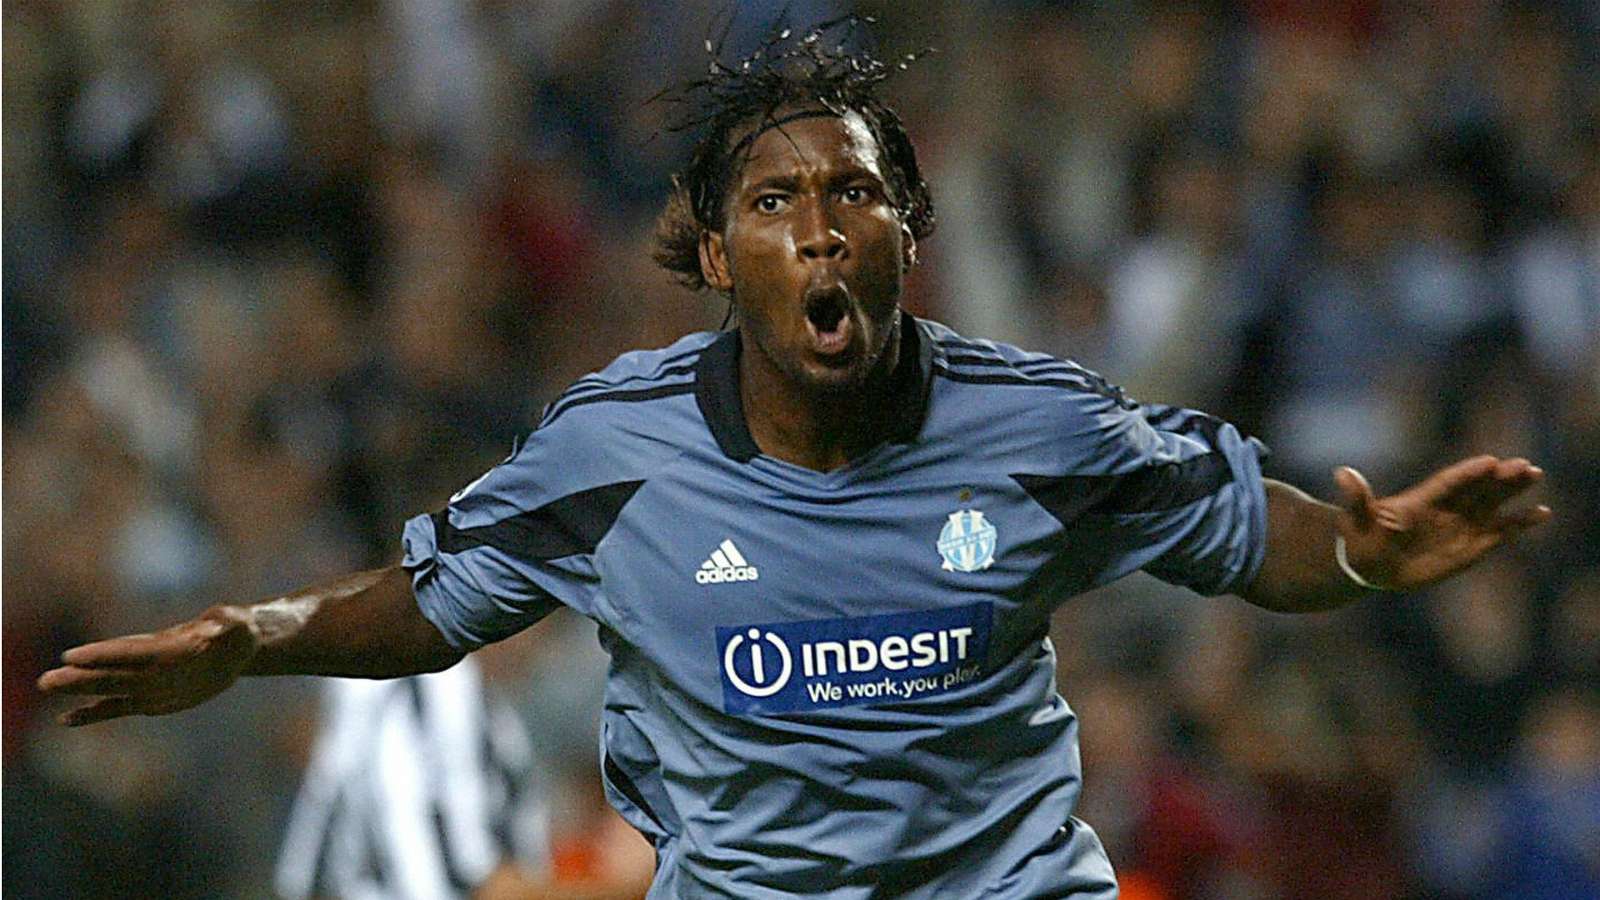 Former Marseille star Drogba beats Ibrahimovic as best Ligue 1 striker in last two decades